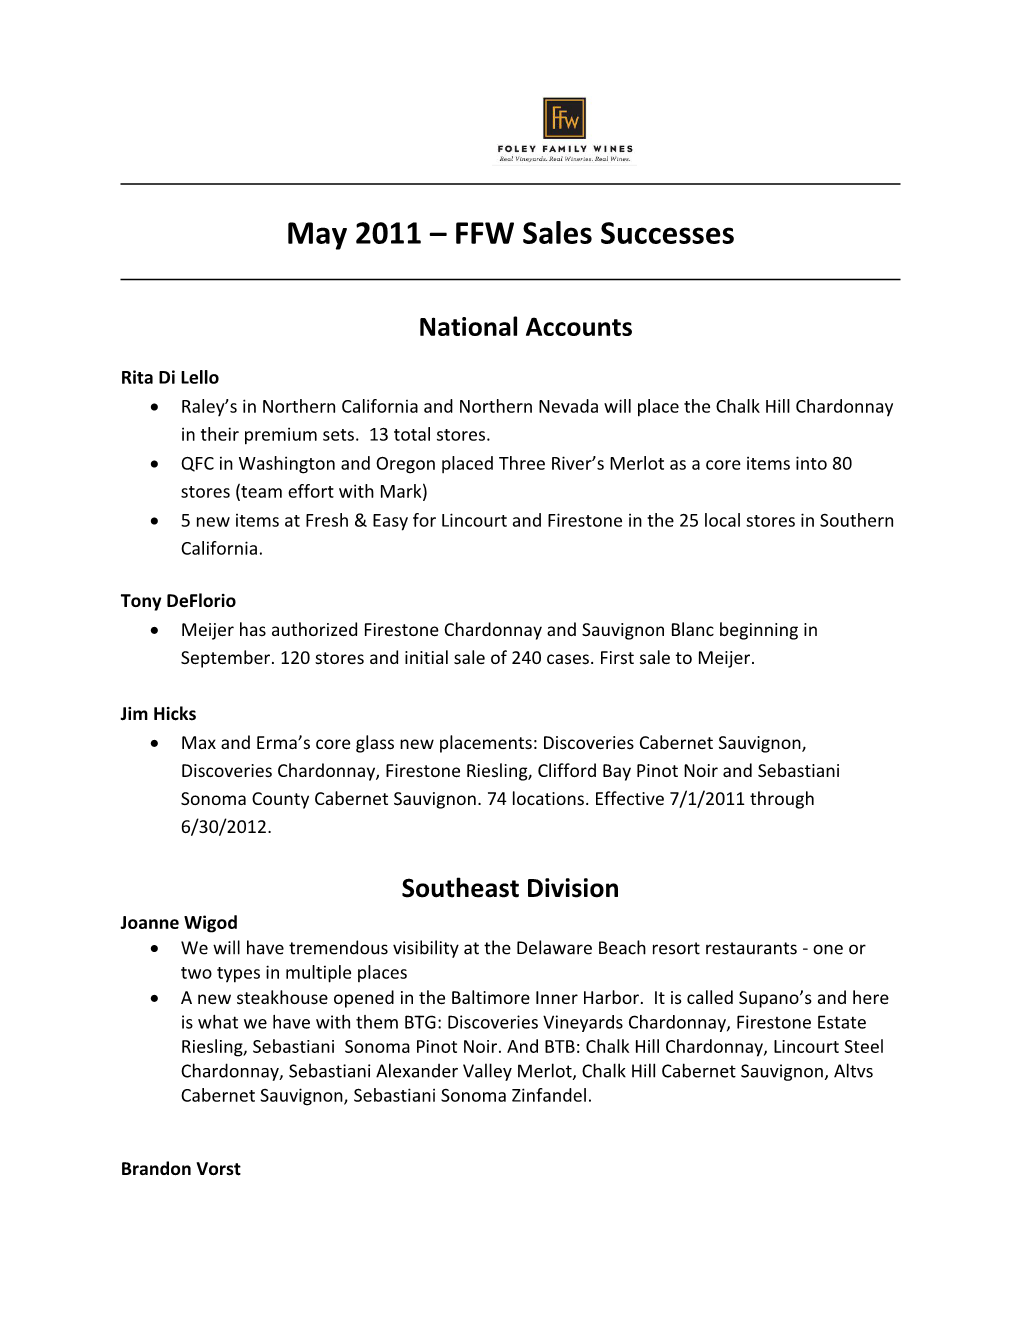 May 2011 FFW Sales Successes